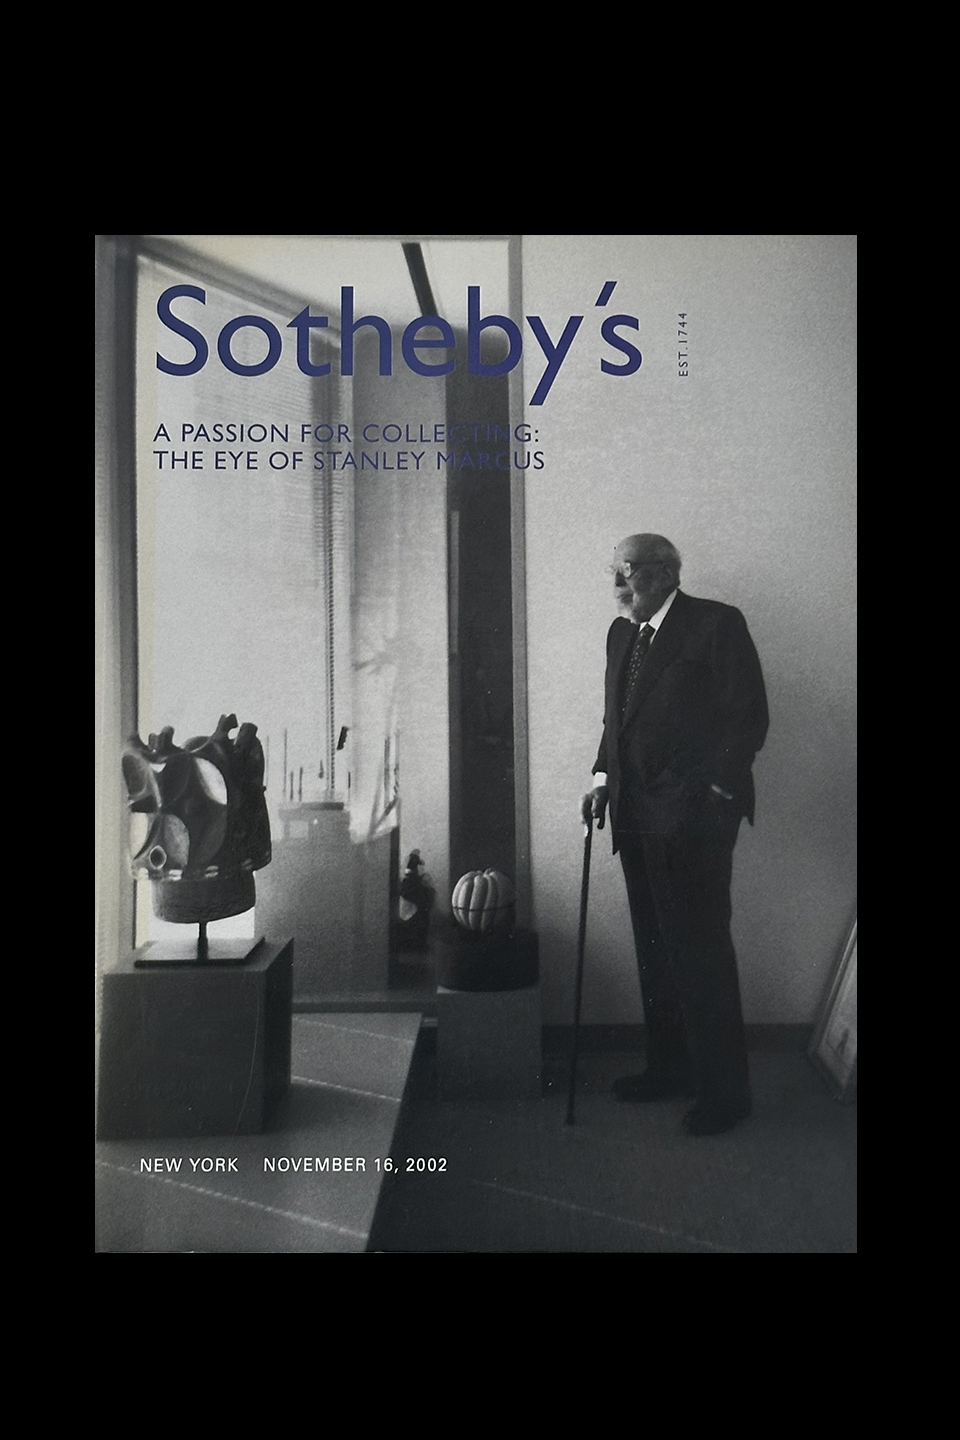 Sotheby's -A Passion For Collecting: The Eye Of Stanley Marcus - New York, November, 2002